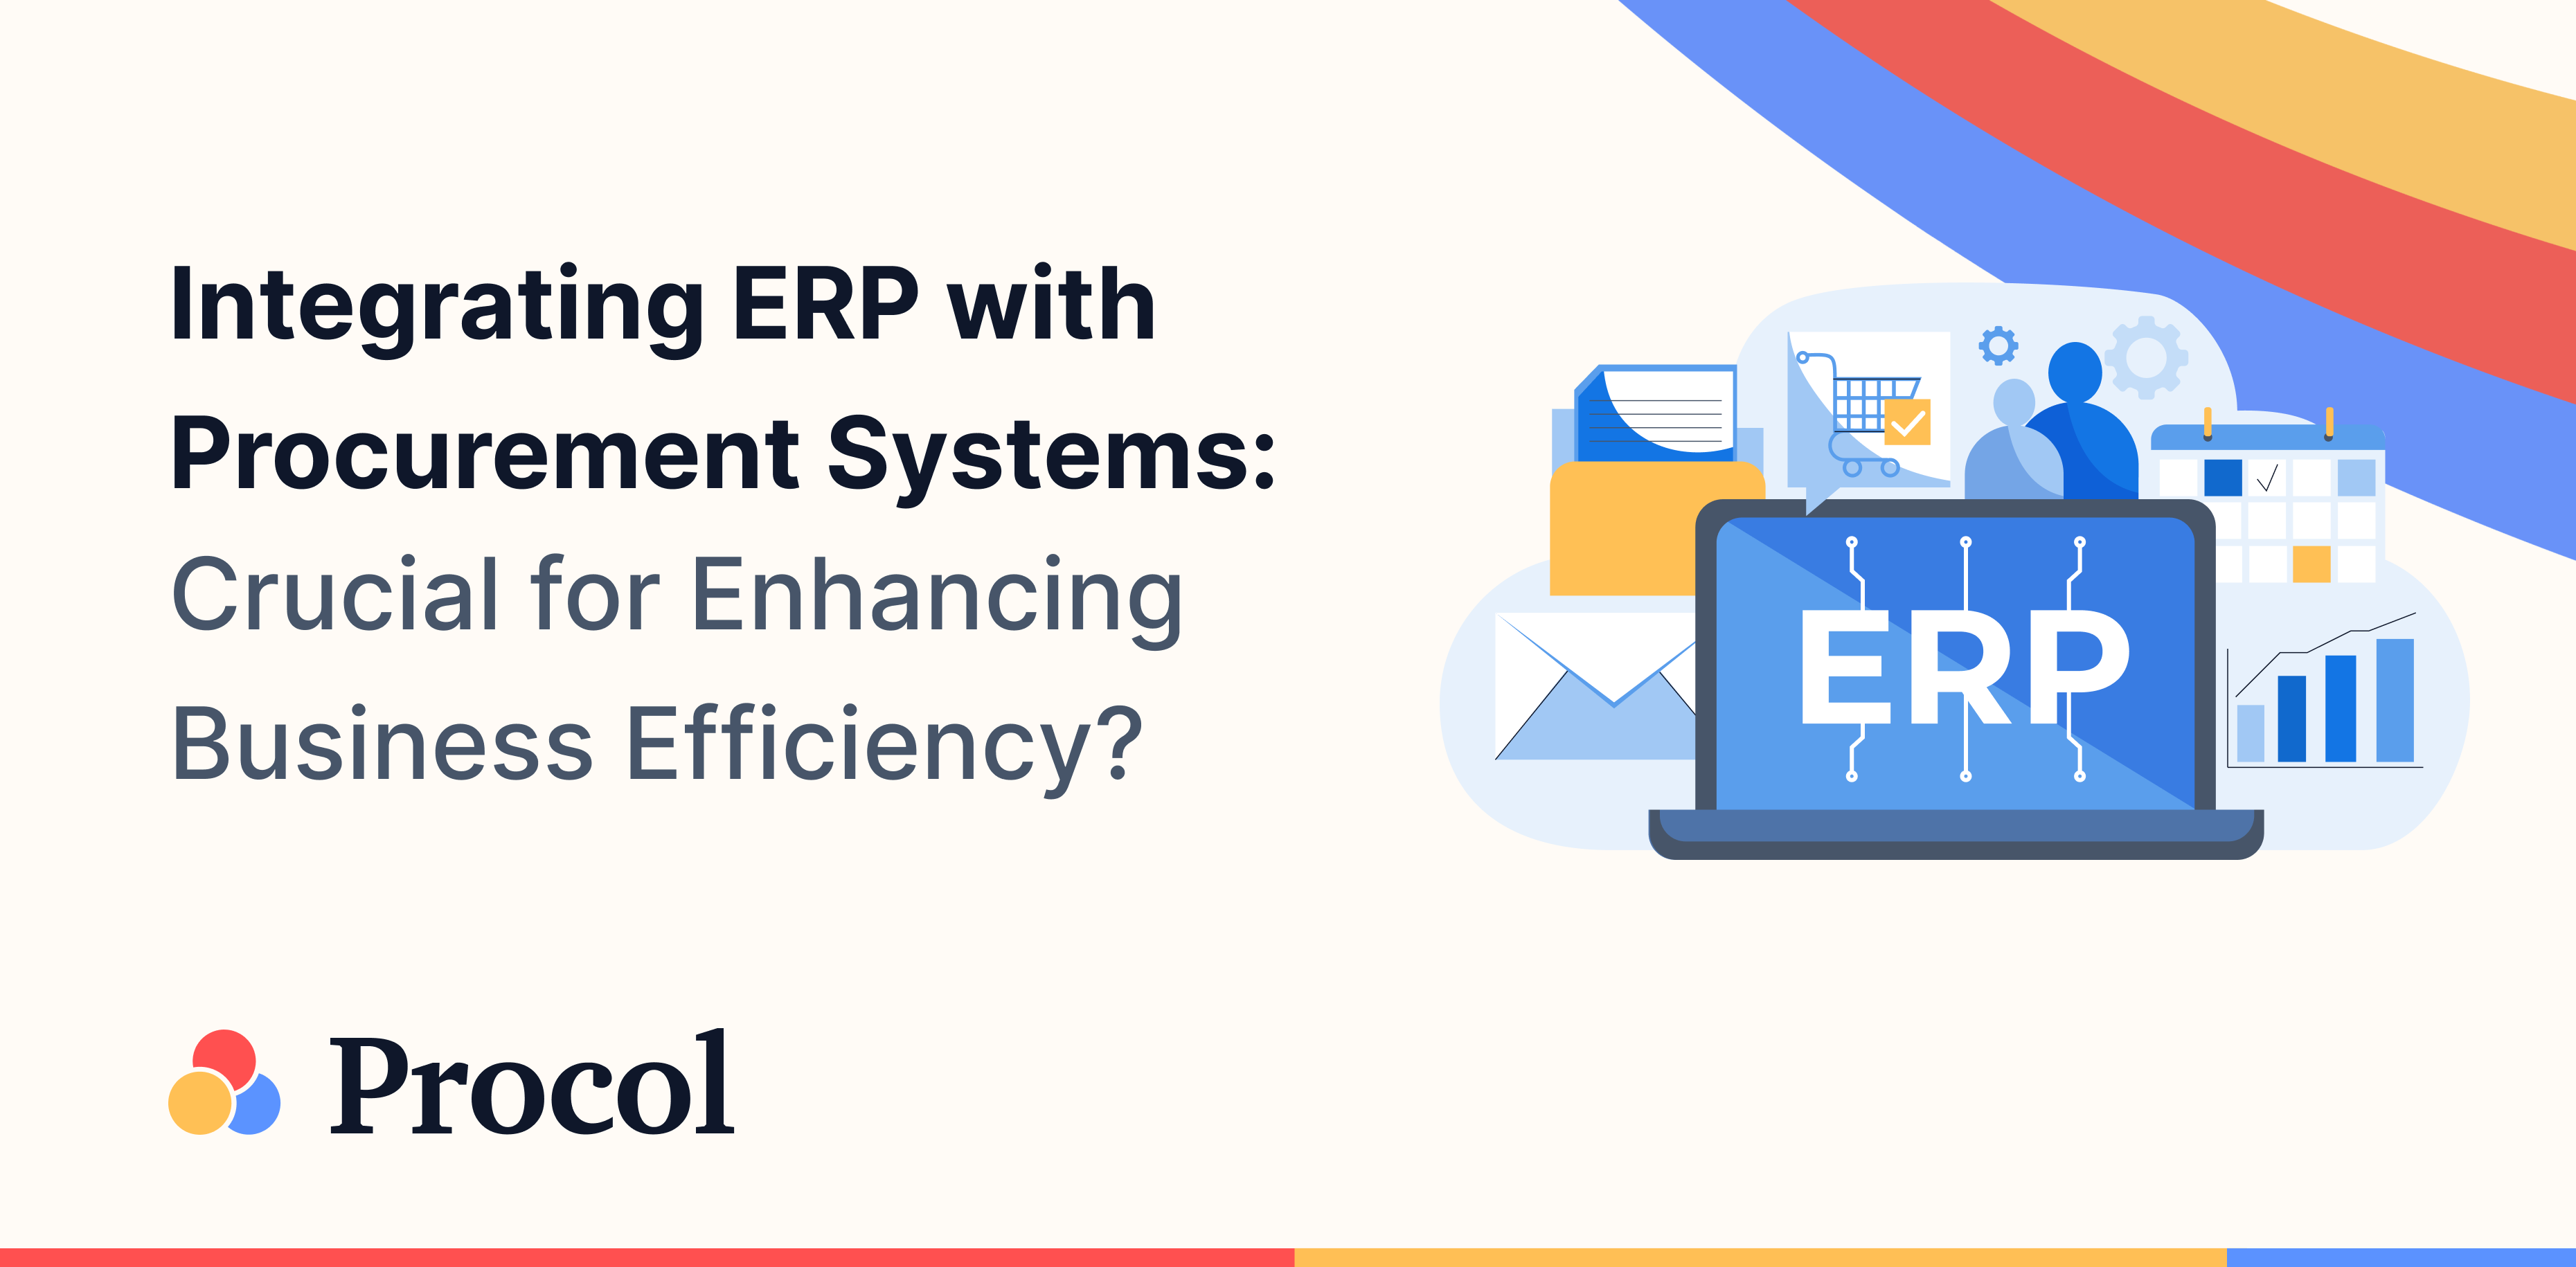 Why is ERP in Procurement Systems Important for Business Efficiency?